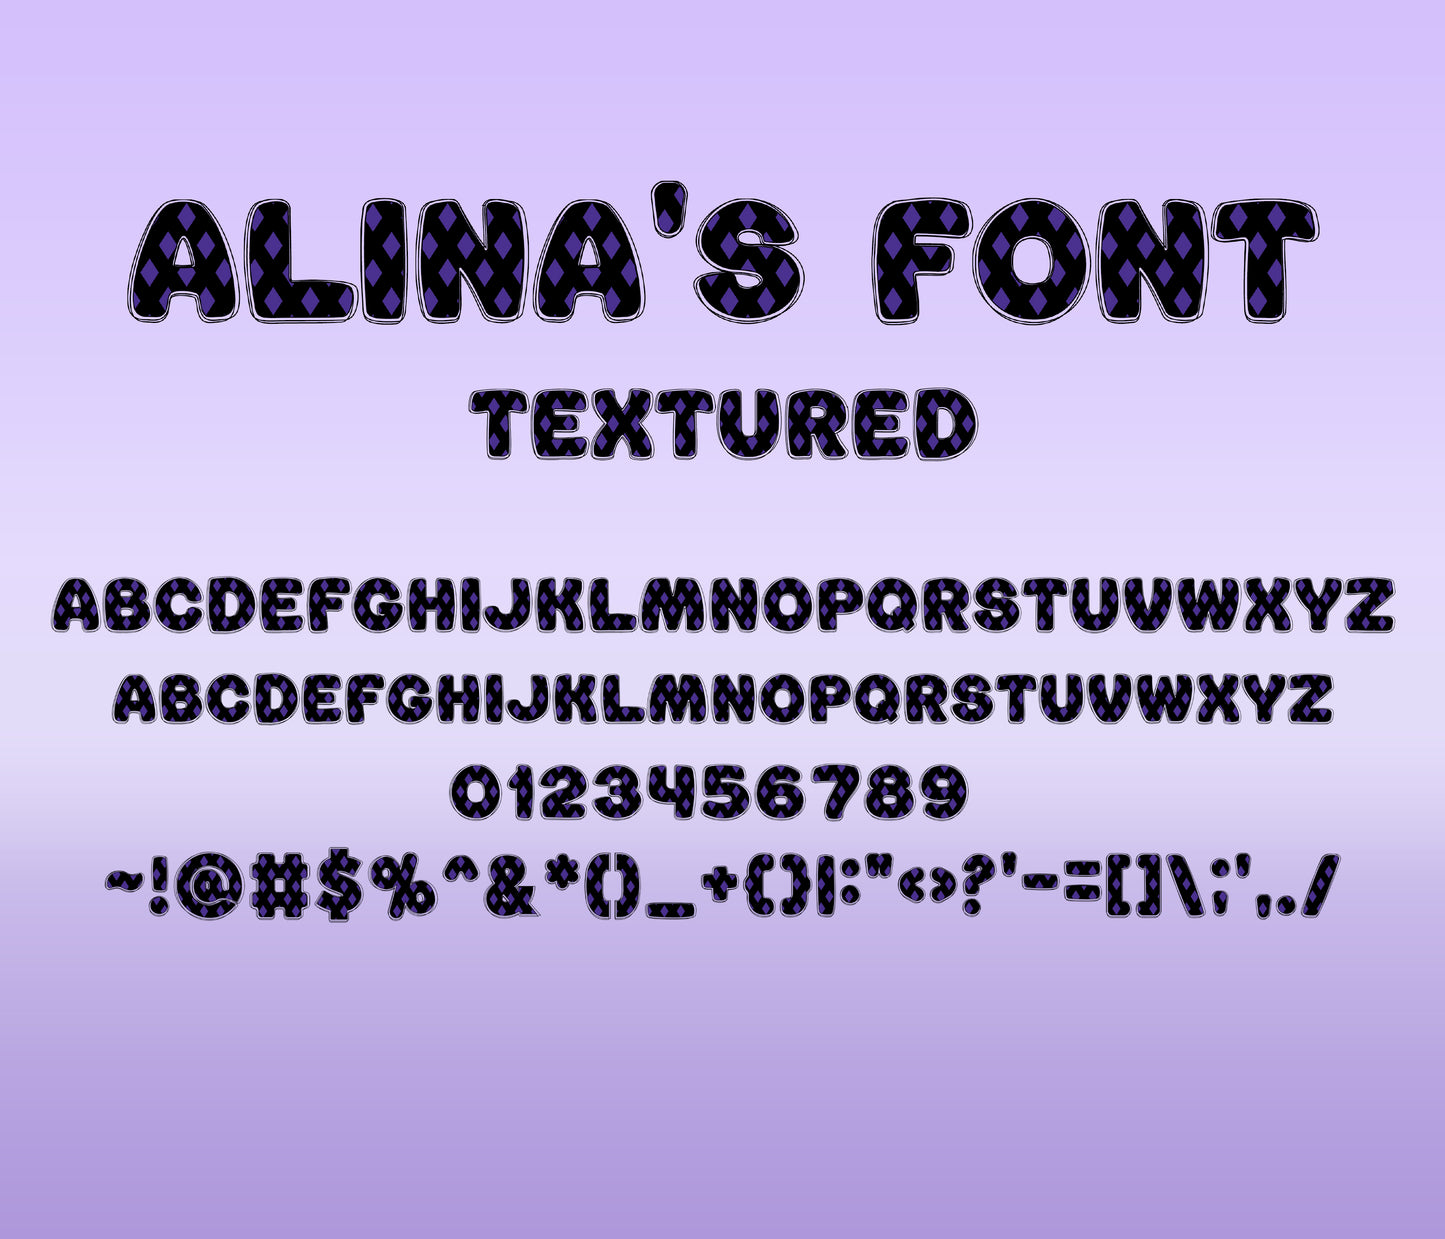 Wednesday's Whimsy Textured Font: A Gothic Typographic Tale